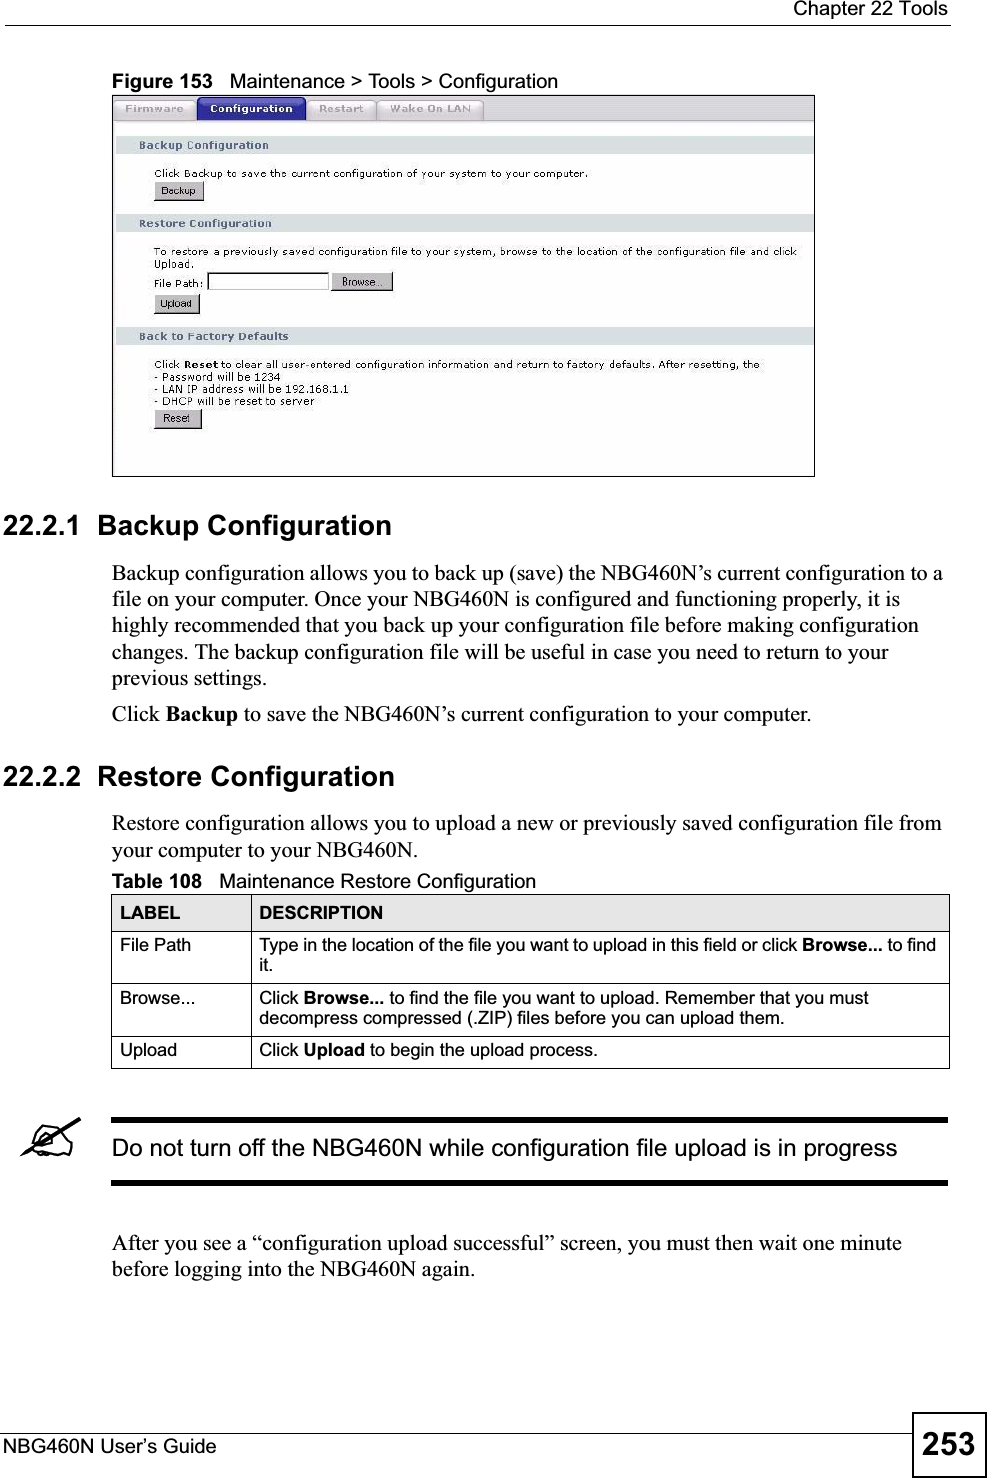  Chapter 22 ToolsNBG460N User’s Guide 253Figure 153   Maintenance &gt; Tools &gt; Configuration 22.2.1  Backup ConfigurationBackup configuration allows you to back up (save) the NBG460N’s current configuration to a file on your computer. Once your NBG460N is configured and functioning properly, it is highly recommended that you back up your configuration file before making configuration changes. The backup configuration file will be useful in case you need to return to your previous settings. Click Backup to save the NBG460N’s current configuration to your computer.22.2.2  Restore ConfigurationRestore configuration allows you to upload a new or previously saved configuration file from your computer to your NBG460N.&quot;Do not turn off the NBG460N while configuration file upload is in progressAfter you see a “configuration upload successful” screen, you must then wait one minute before logging into the NBG460N again. Table 108   Maintenance Restore ConfigurationLABEL DESCRIPTIONFile Path  Type in the location of the file you want to upload in this field or click Browse... to find it.Browse...  Click Browse... to find the file you want to upload. Remember that you must decompress compressed (.ZIP) files before you can upload them. Upload  Click Upload to begin the upload process.